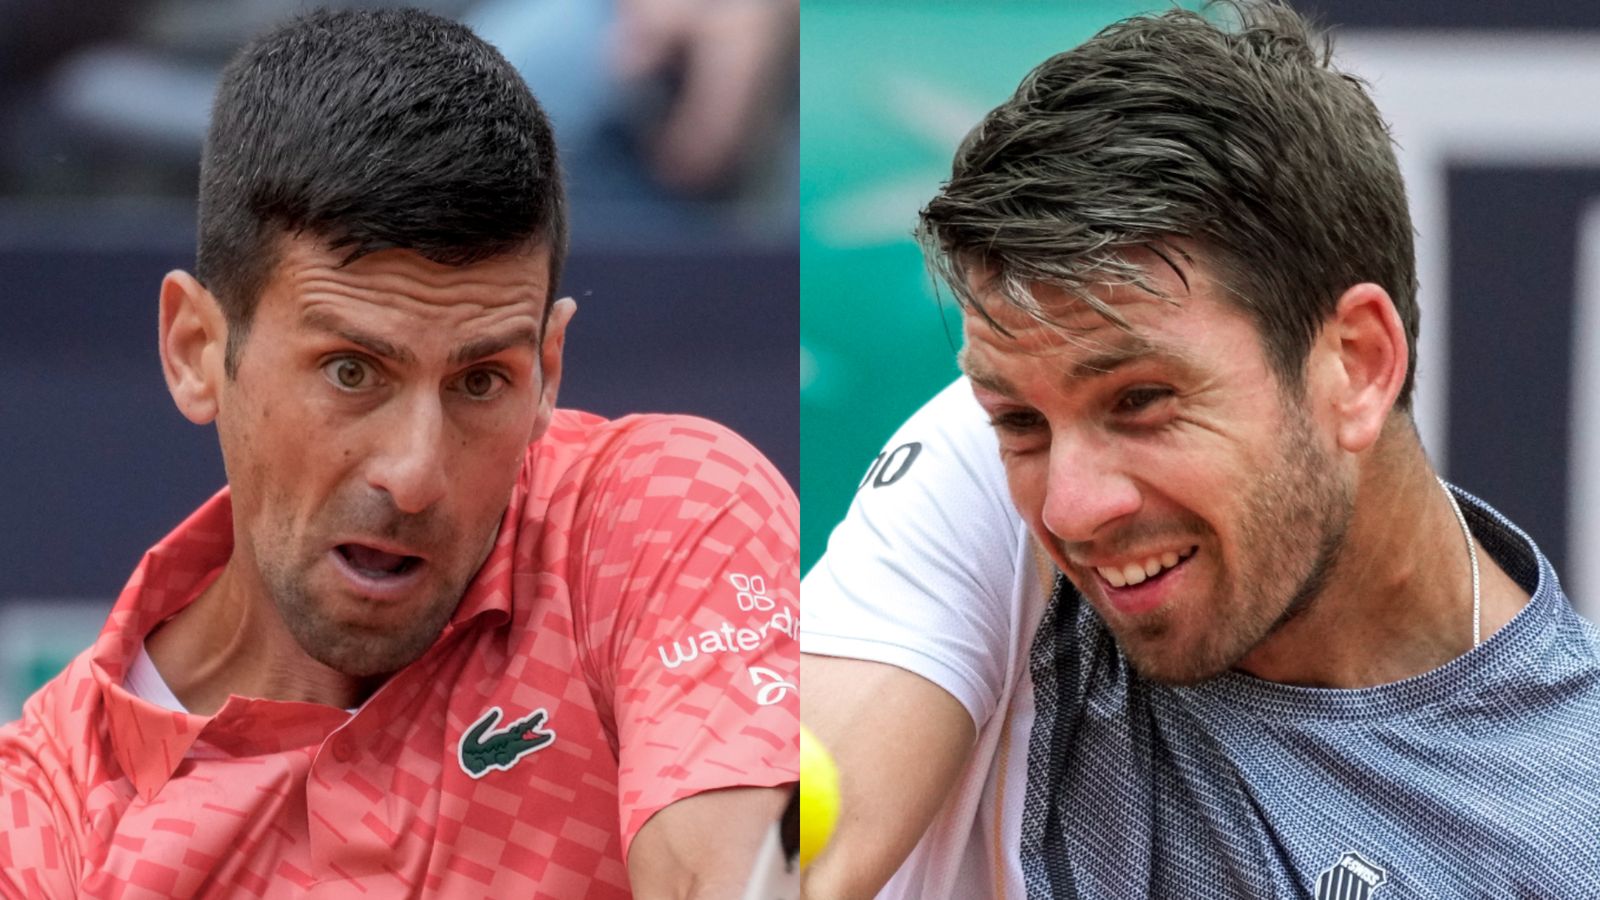 Djokovic takes issue with Norrie's behavior at Italian Open: 'Not